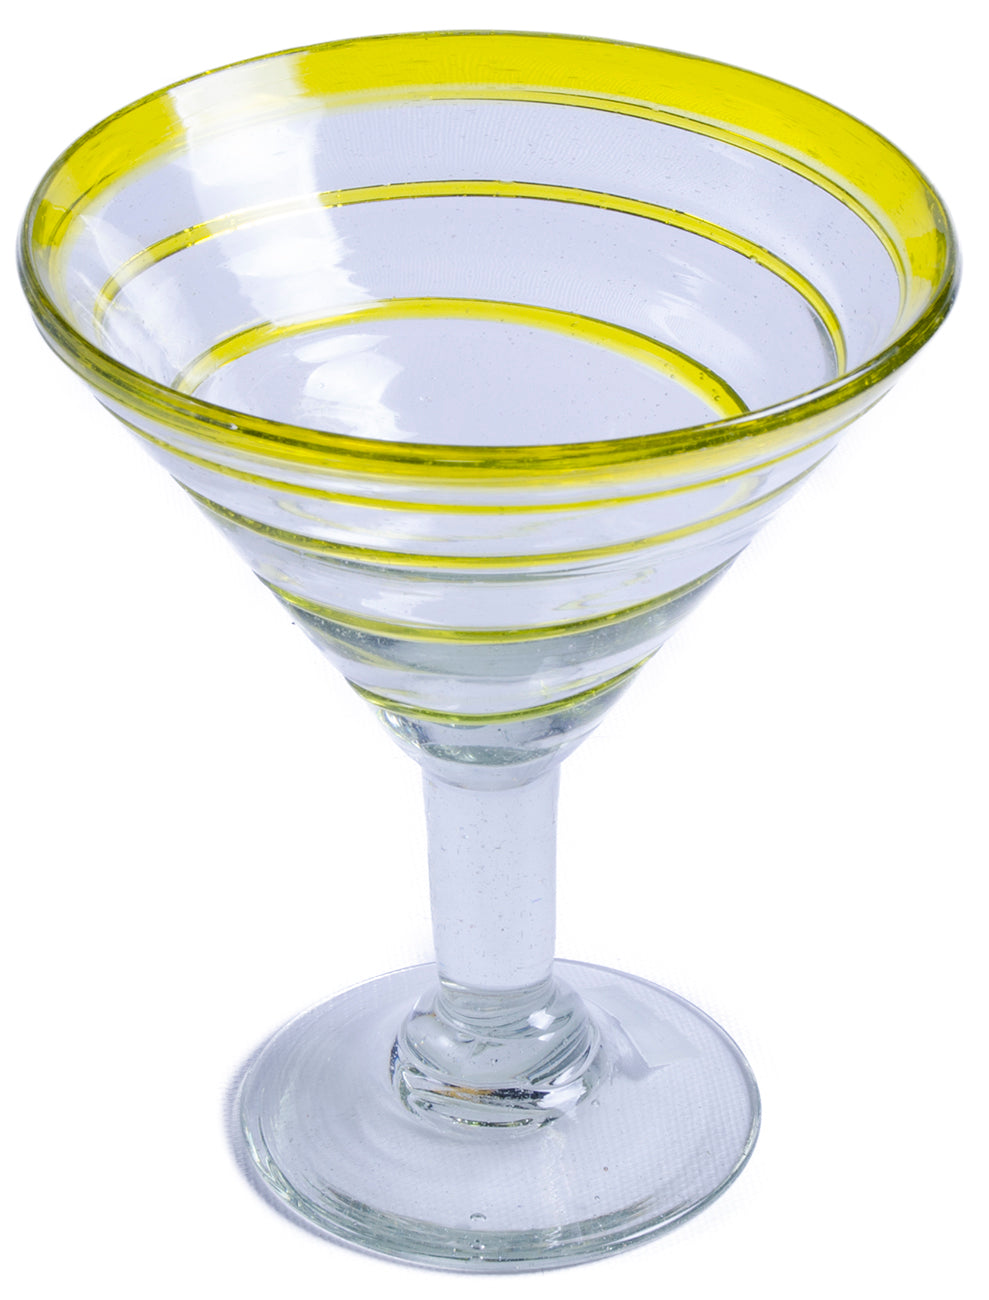 JILLMO Martini Glass, Insulated Stainless Steel Margarita Glass  with Lid, Set of 2: Martini Glasses